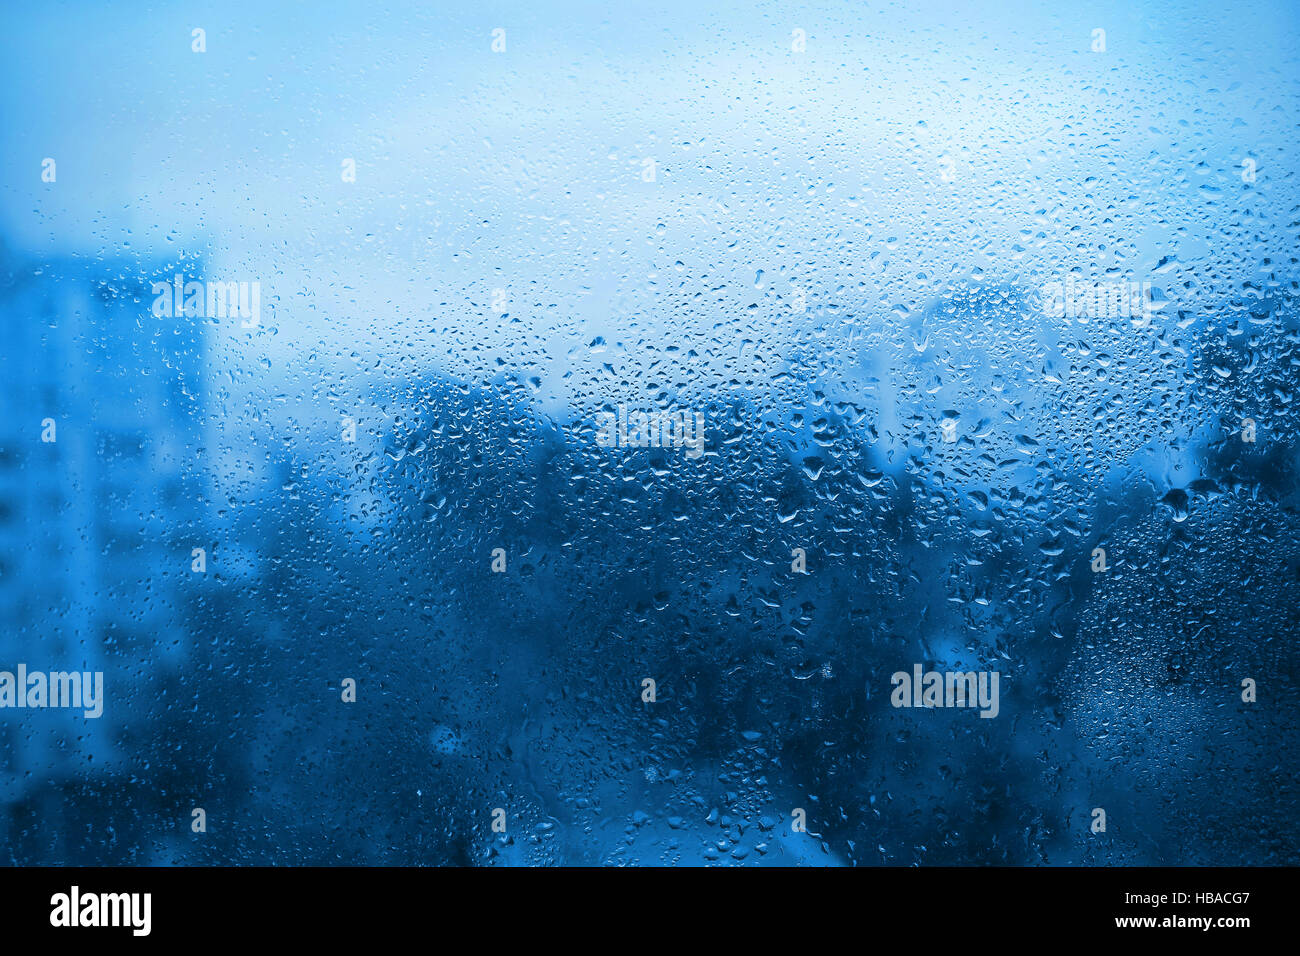 Natural drops of water on window glass Stock Photo